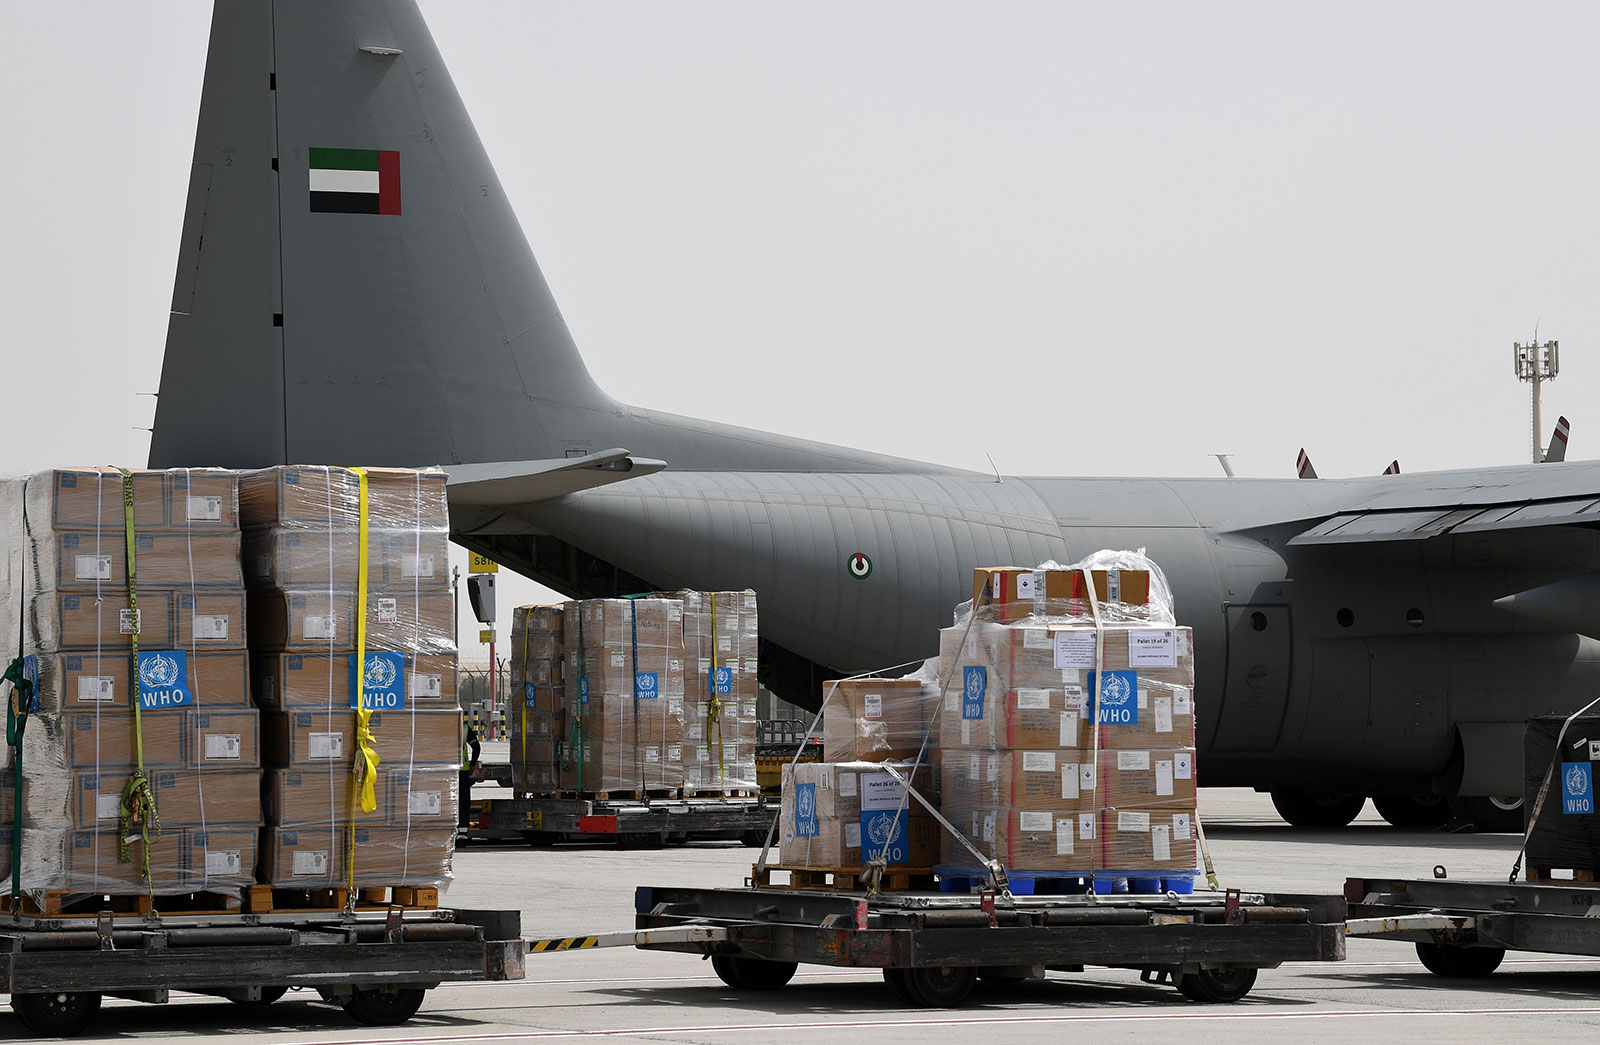 Medical equipment and coronavirus testing kits provided by the World Health Organization are transported at the Al Maktoum International Airport in Dubai on March 2.